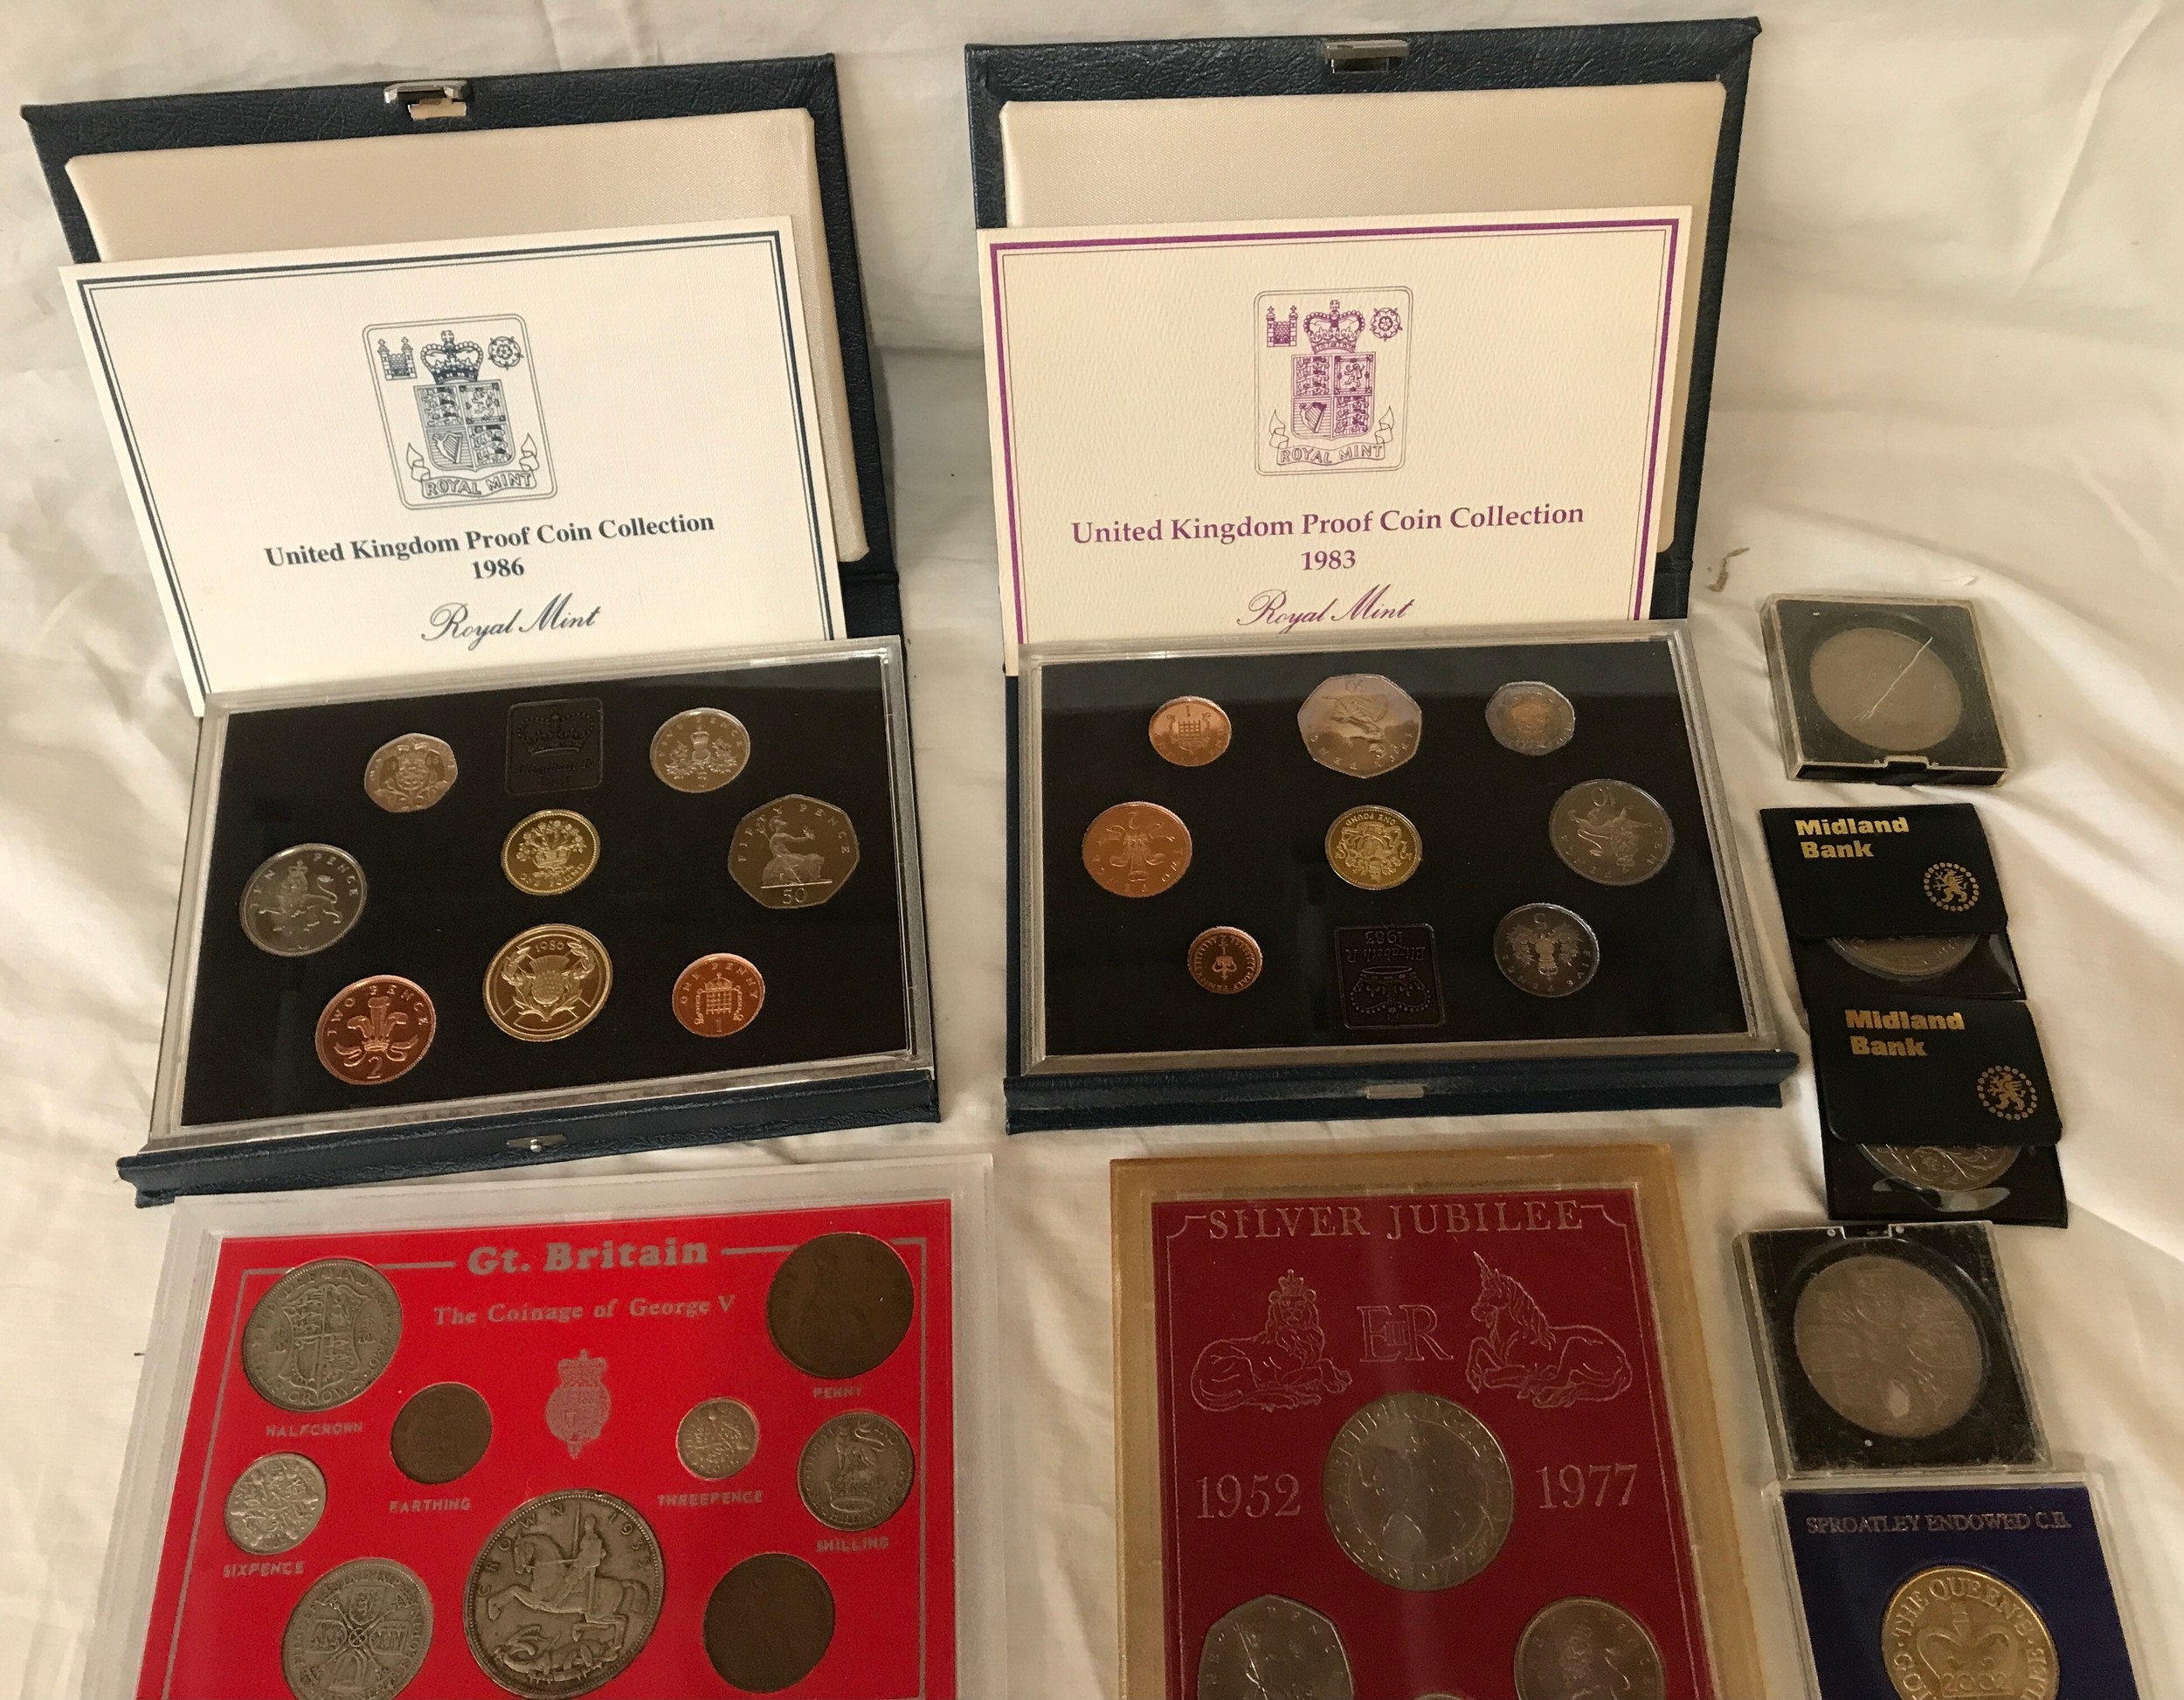 British coinage collection: Proof coins 1986, 1983,1977, George V coinage Queens Diamond Jubilee - Image 4 of 5